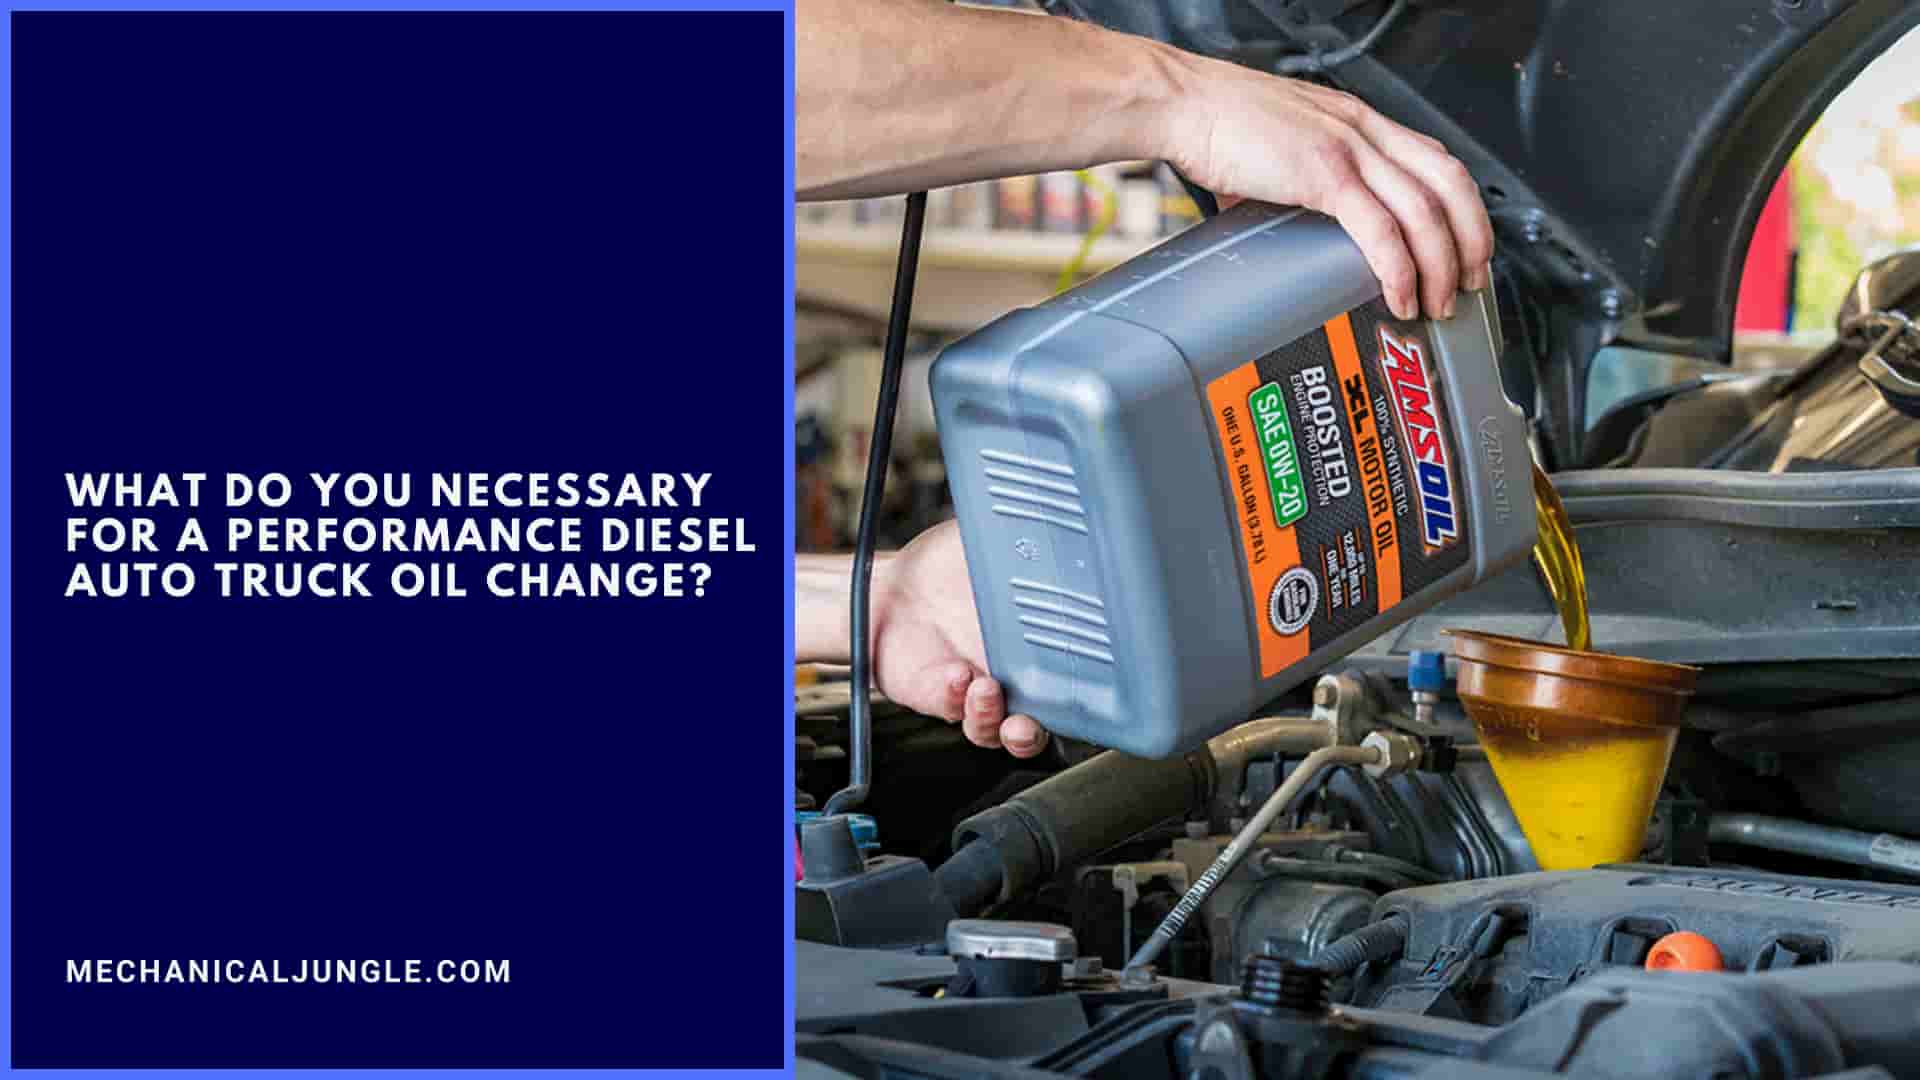 What Do You Necessary for a Performance Diesel Auto Truck Oil Change?